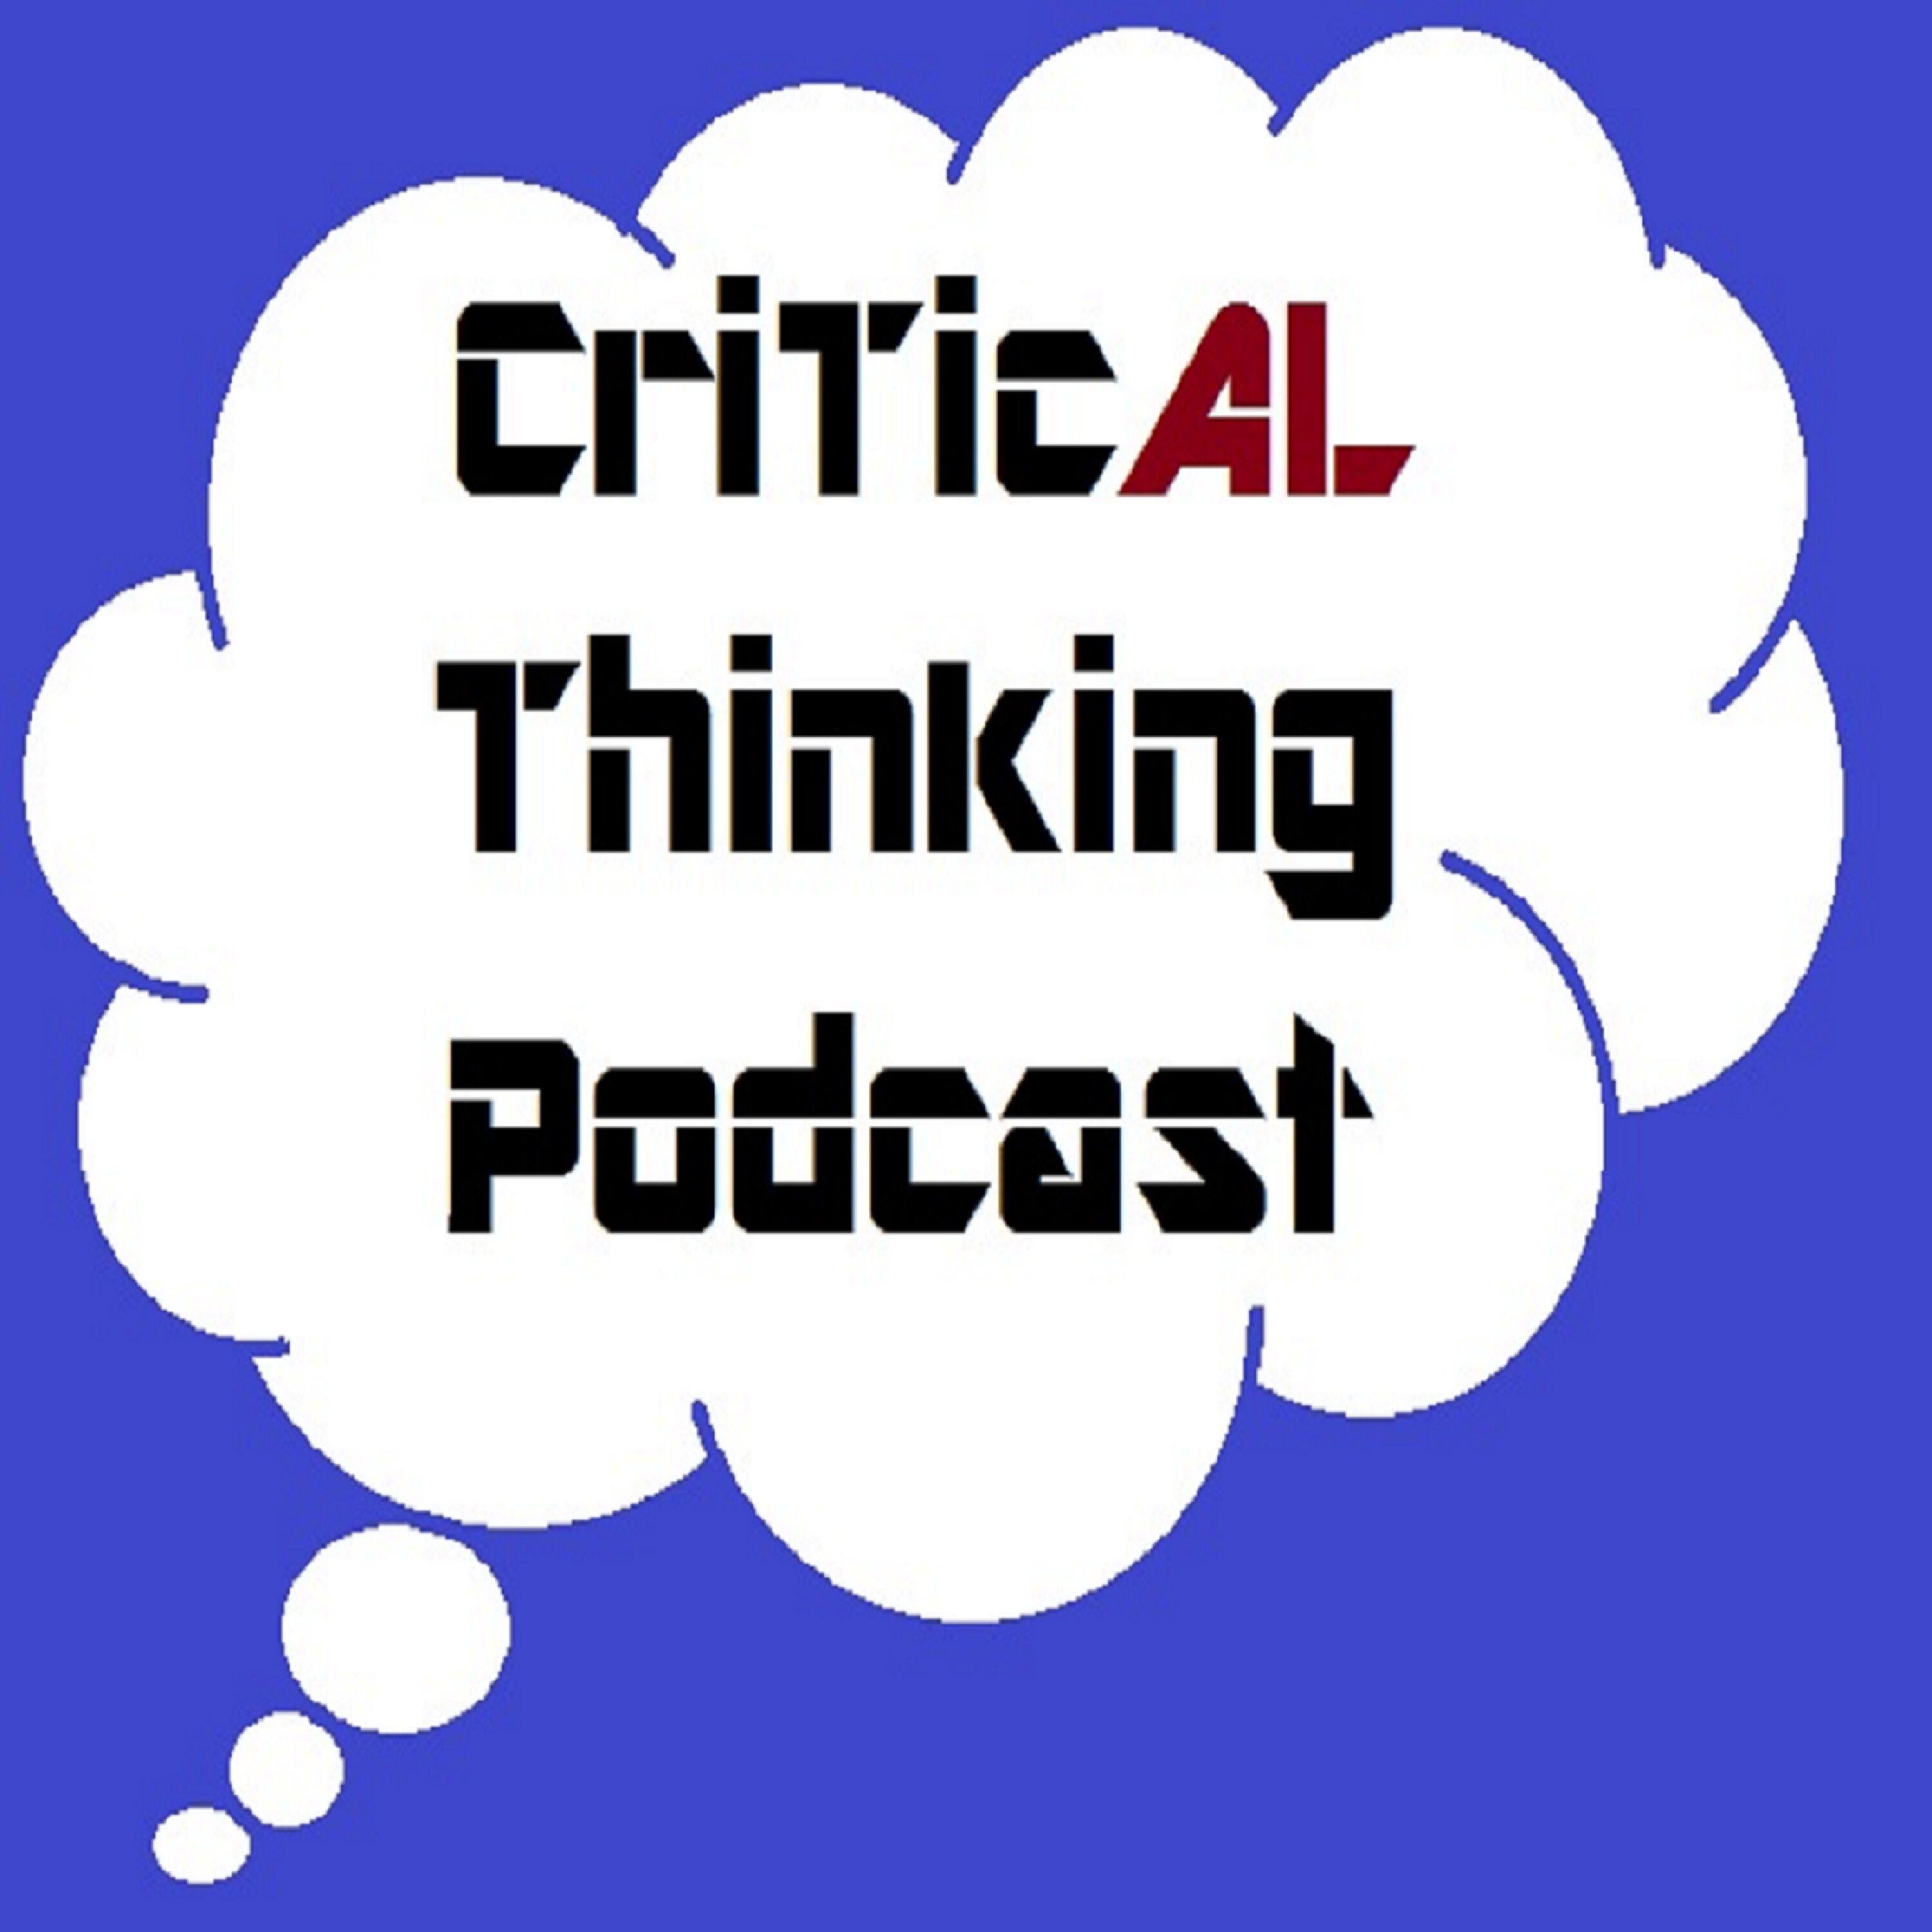 the critical thinking podcast